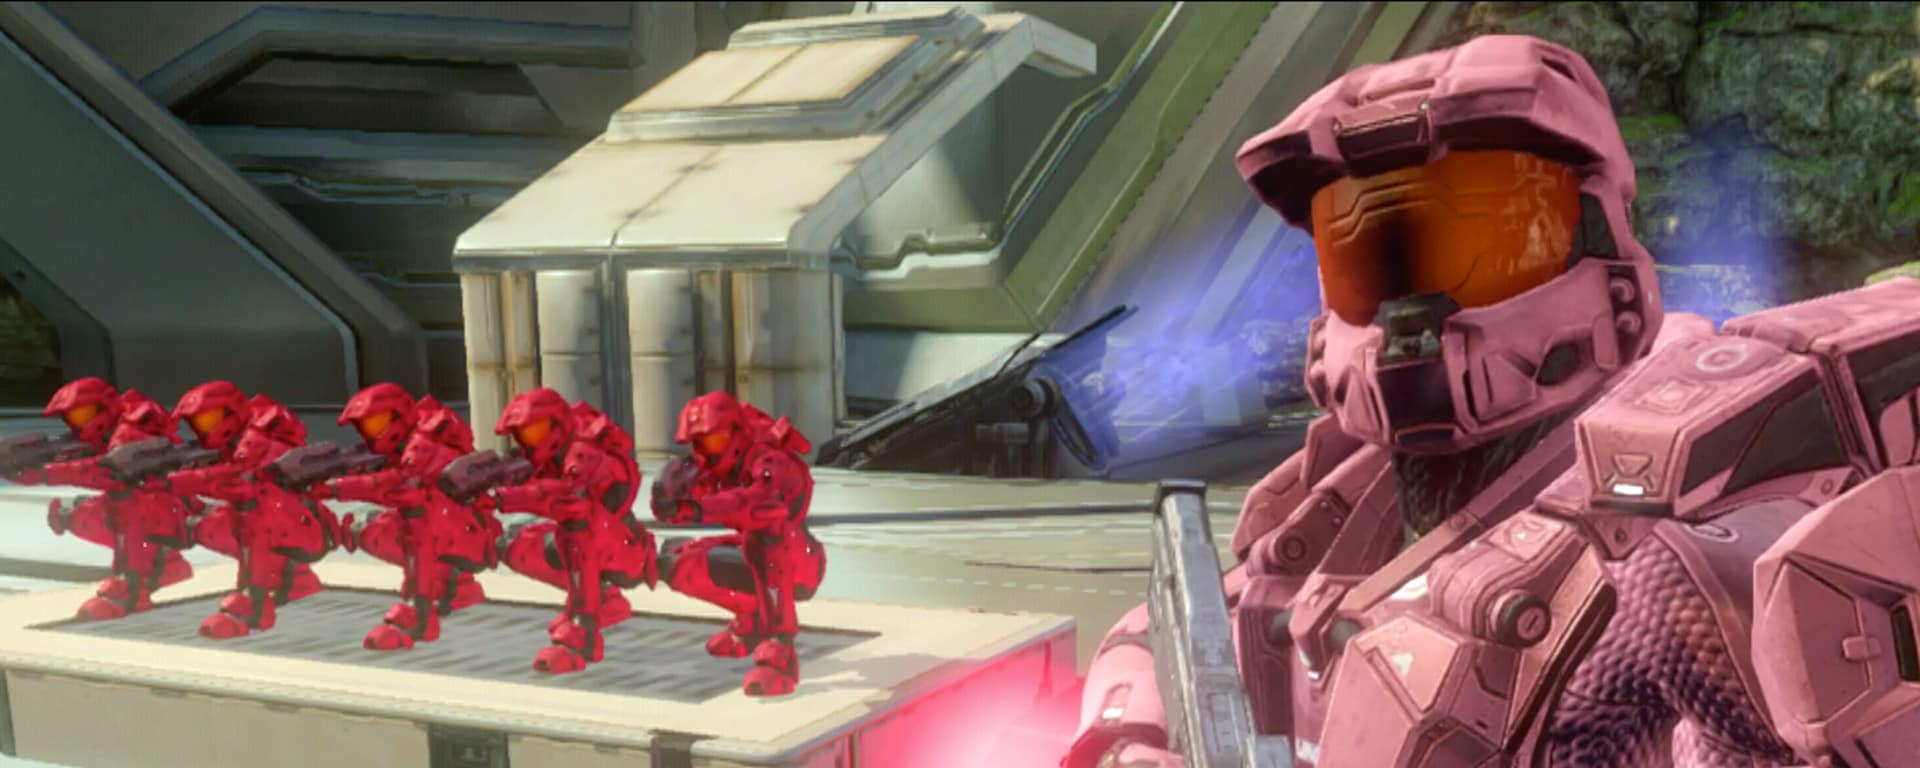 Red vs. Blue: Halo Recap, Episodes 6-8 - Rooster Teeth